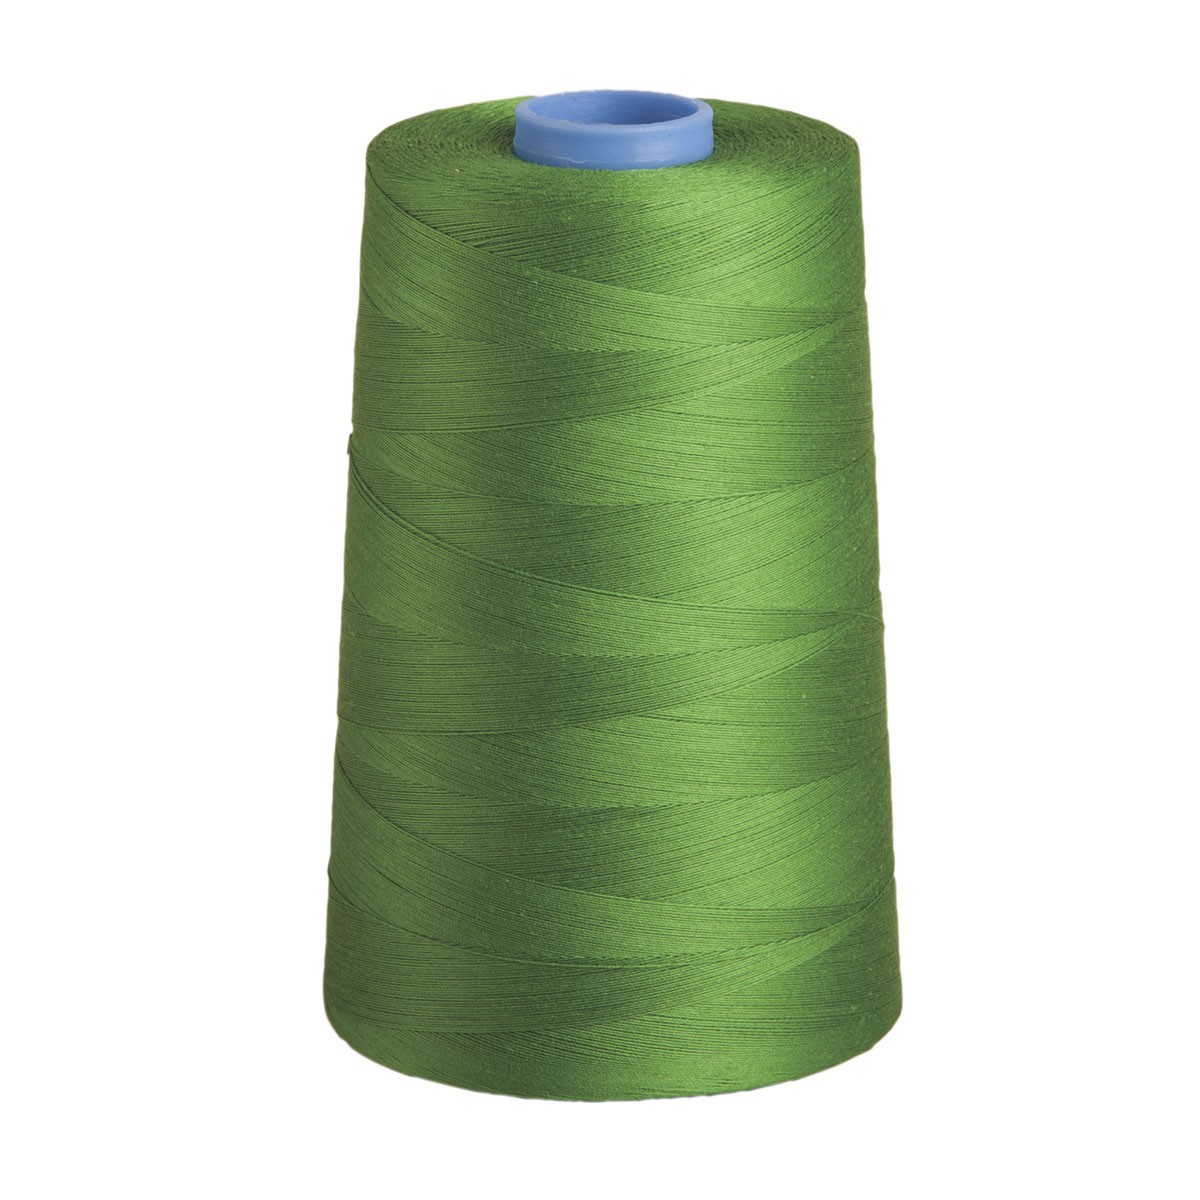 Nylon Thread Green Olive 16 Ounce Cone Made in USA by A&E TEX 400